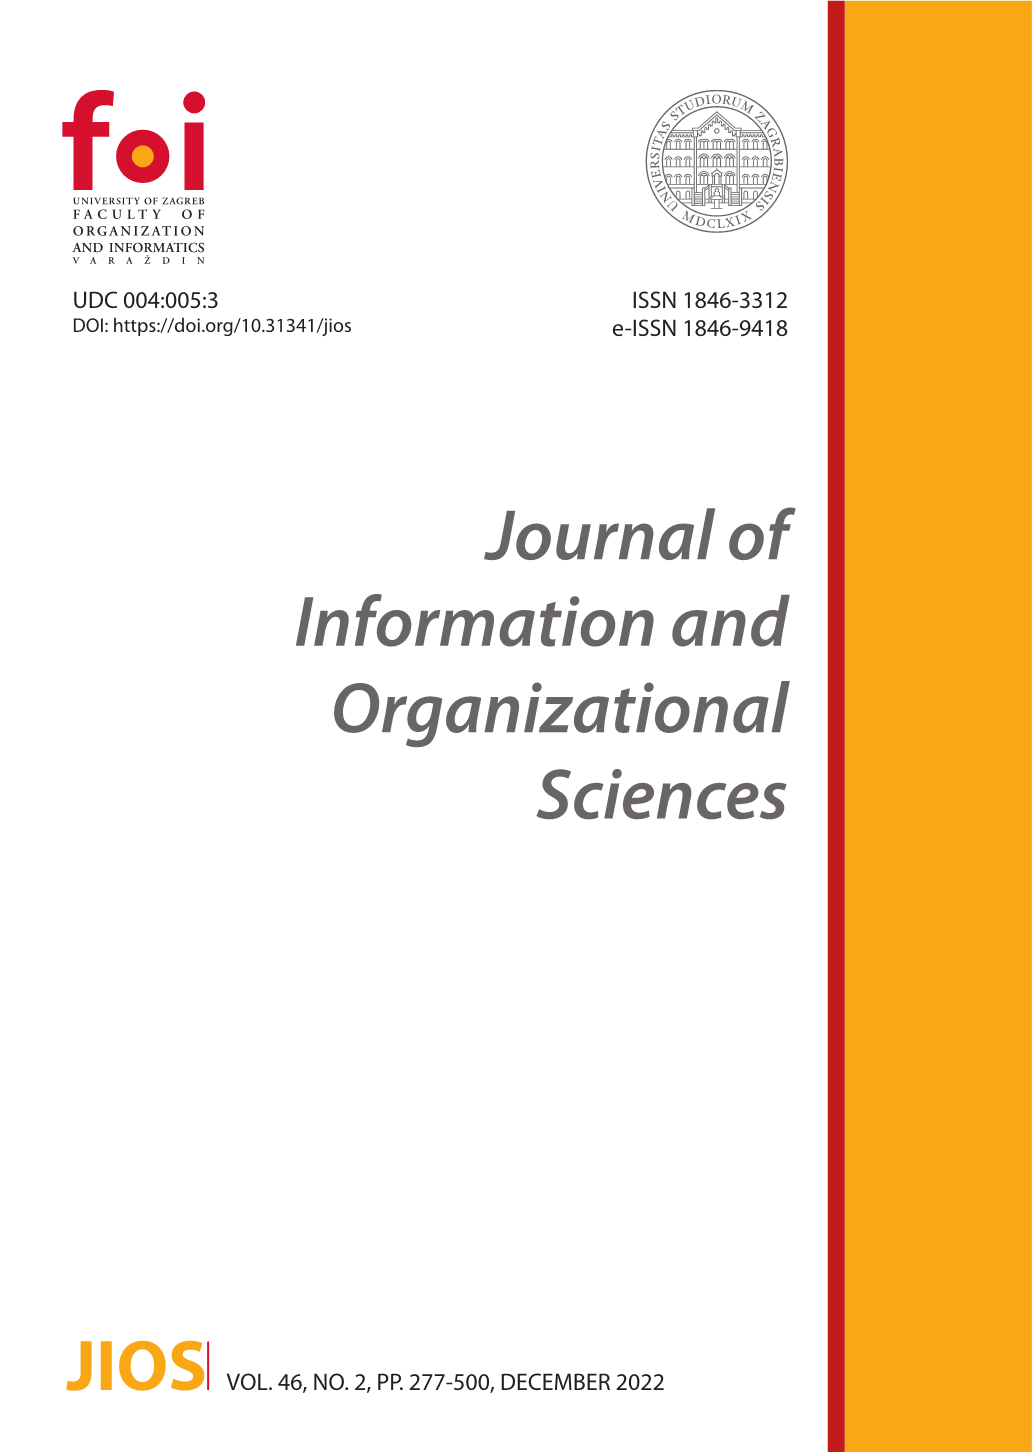 The Relationship of Intergenerational Perceptions of Work Ethics and Workplace Deviation Behaviors in Academic Staff Cover Image